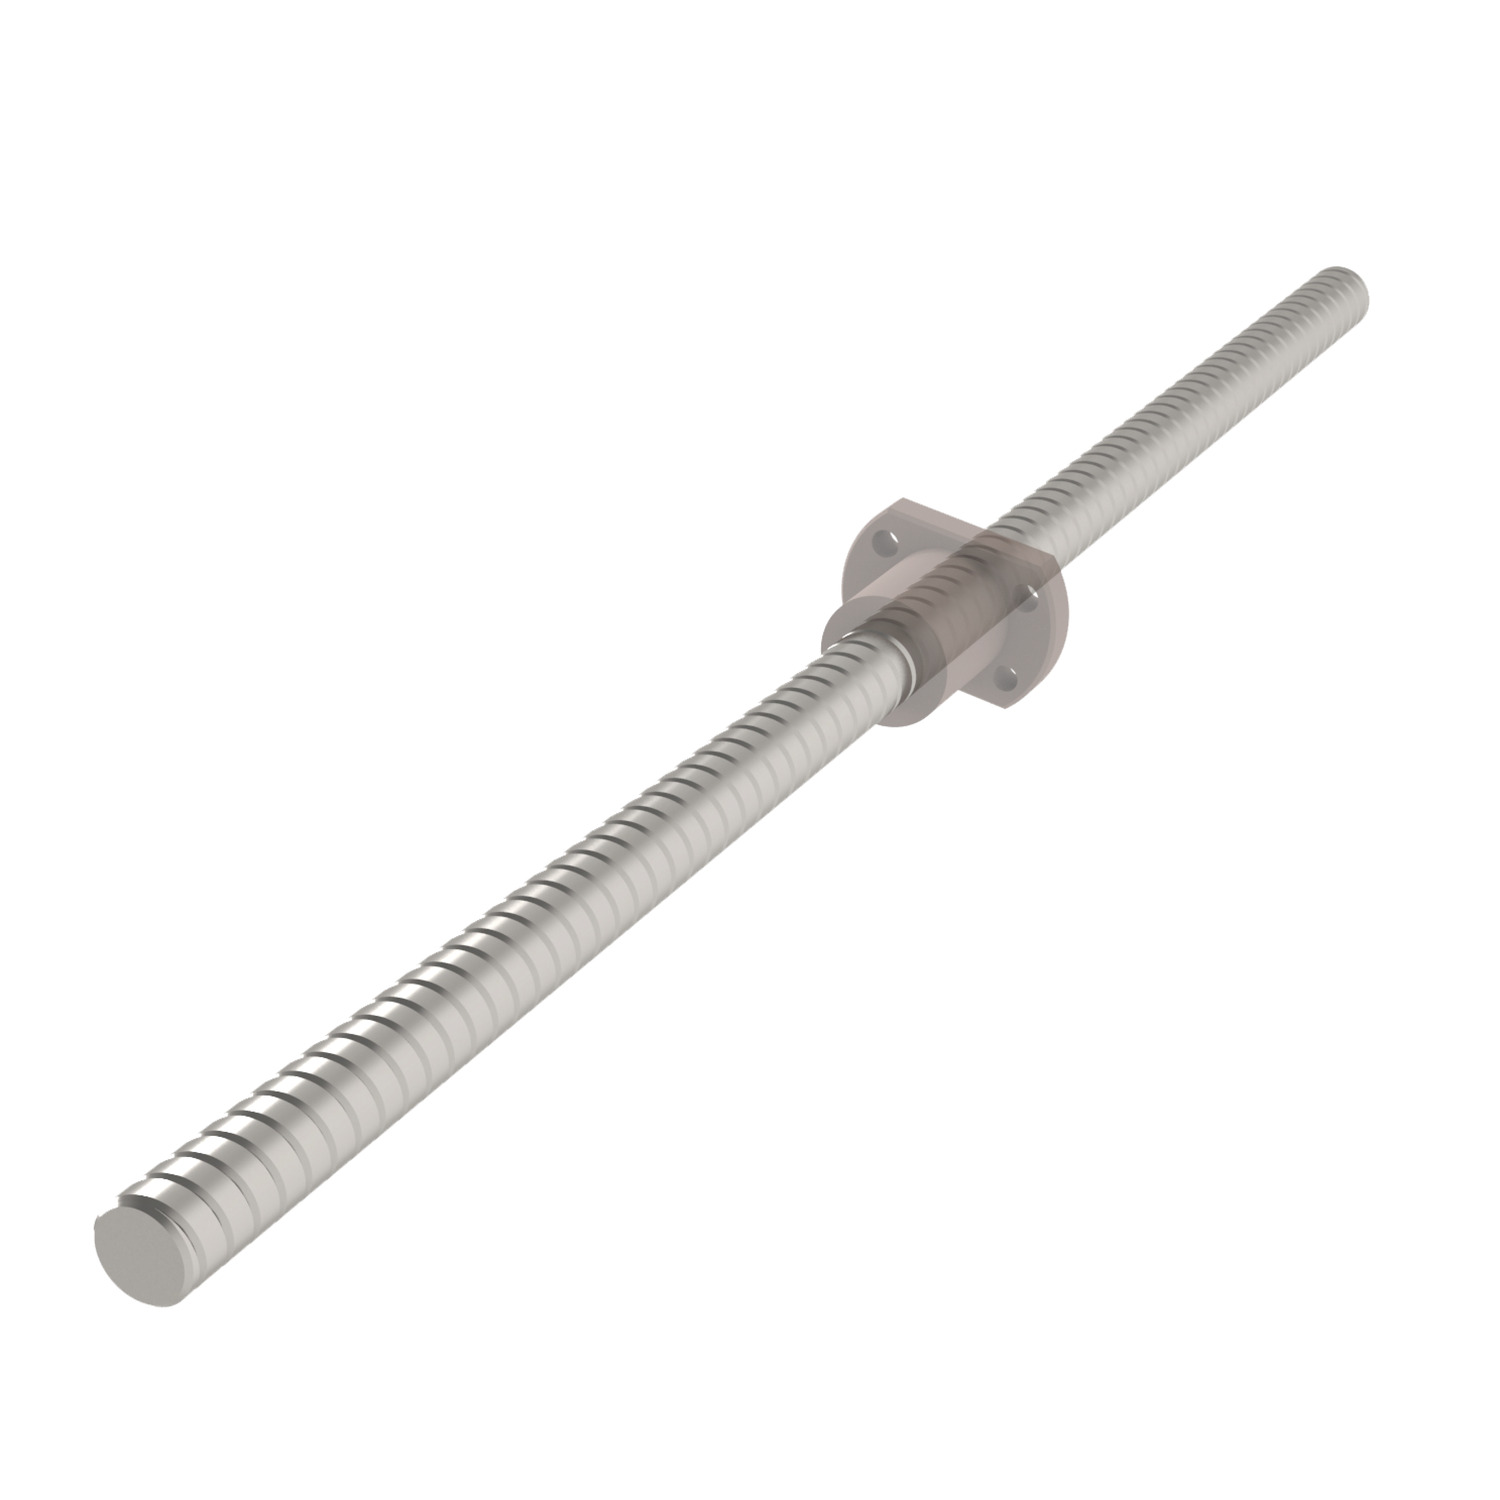 High Helix Lead Screws - Stainless High precision lead screws with flanged nut. Stainless steel.